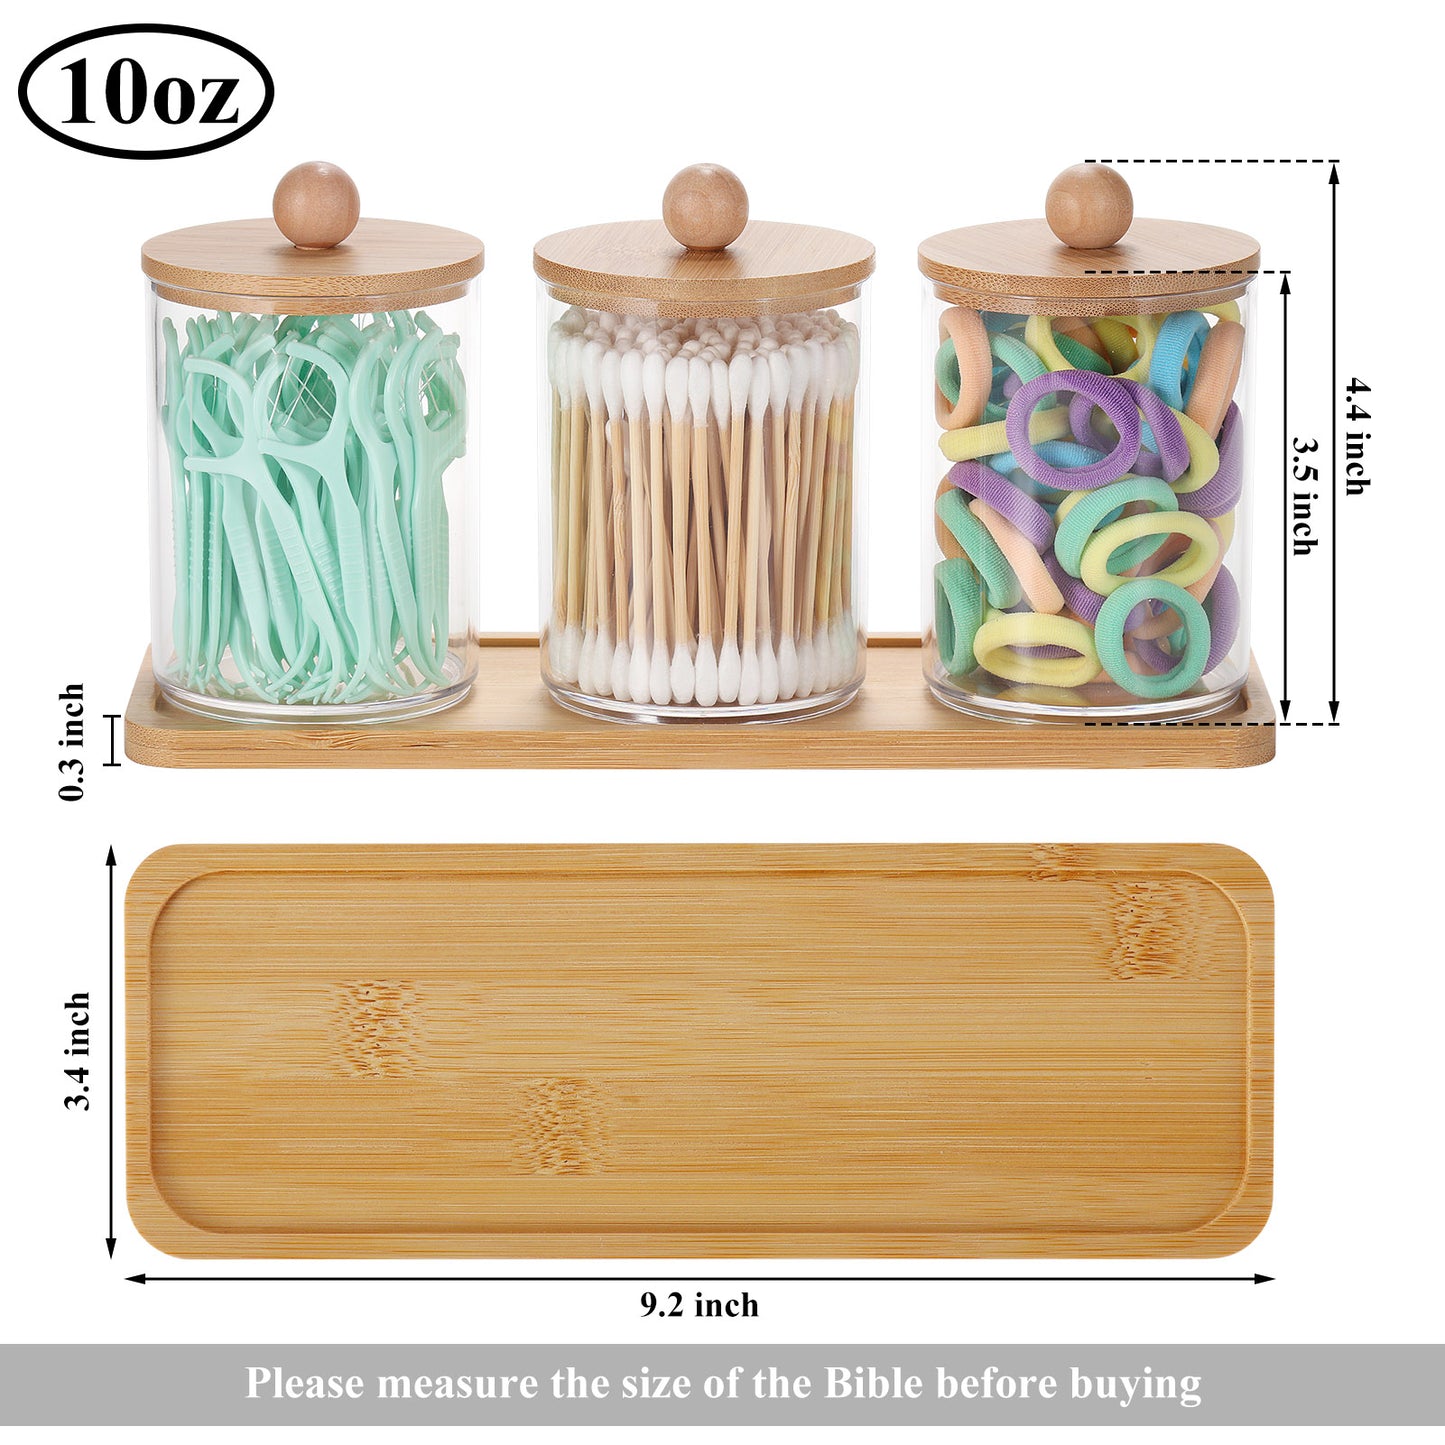 AUANIYAN 3pcs Acrylic Qtip Holder with Bamboo Lids, Qtip Holder for Cotton Balls Transparent Bathroom Container Accessories Storage Organizer